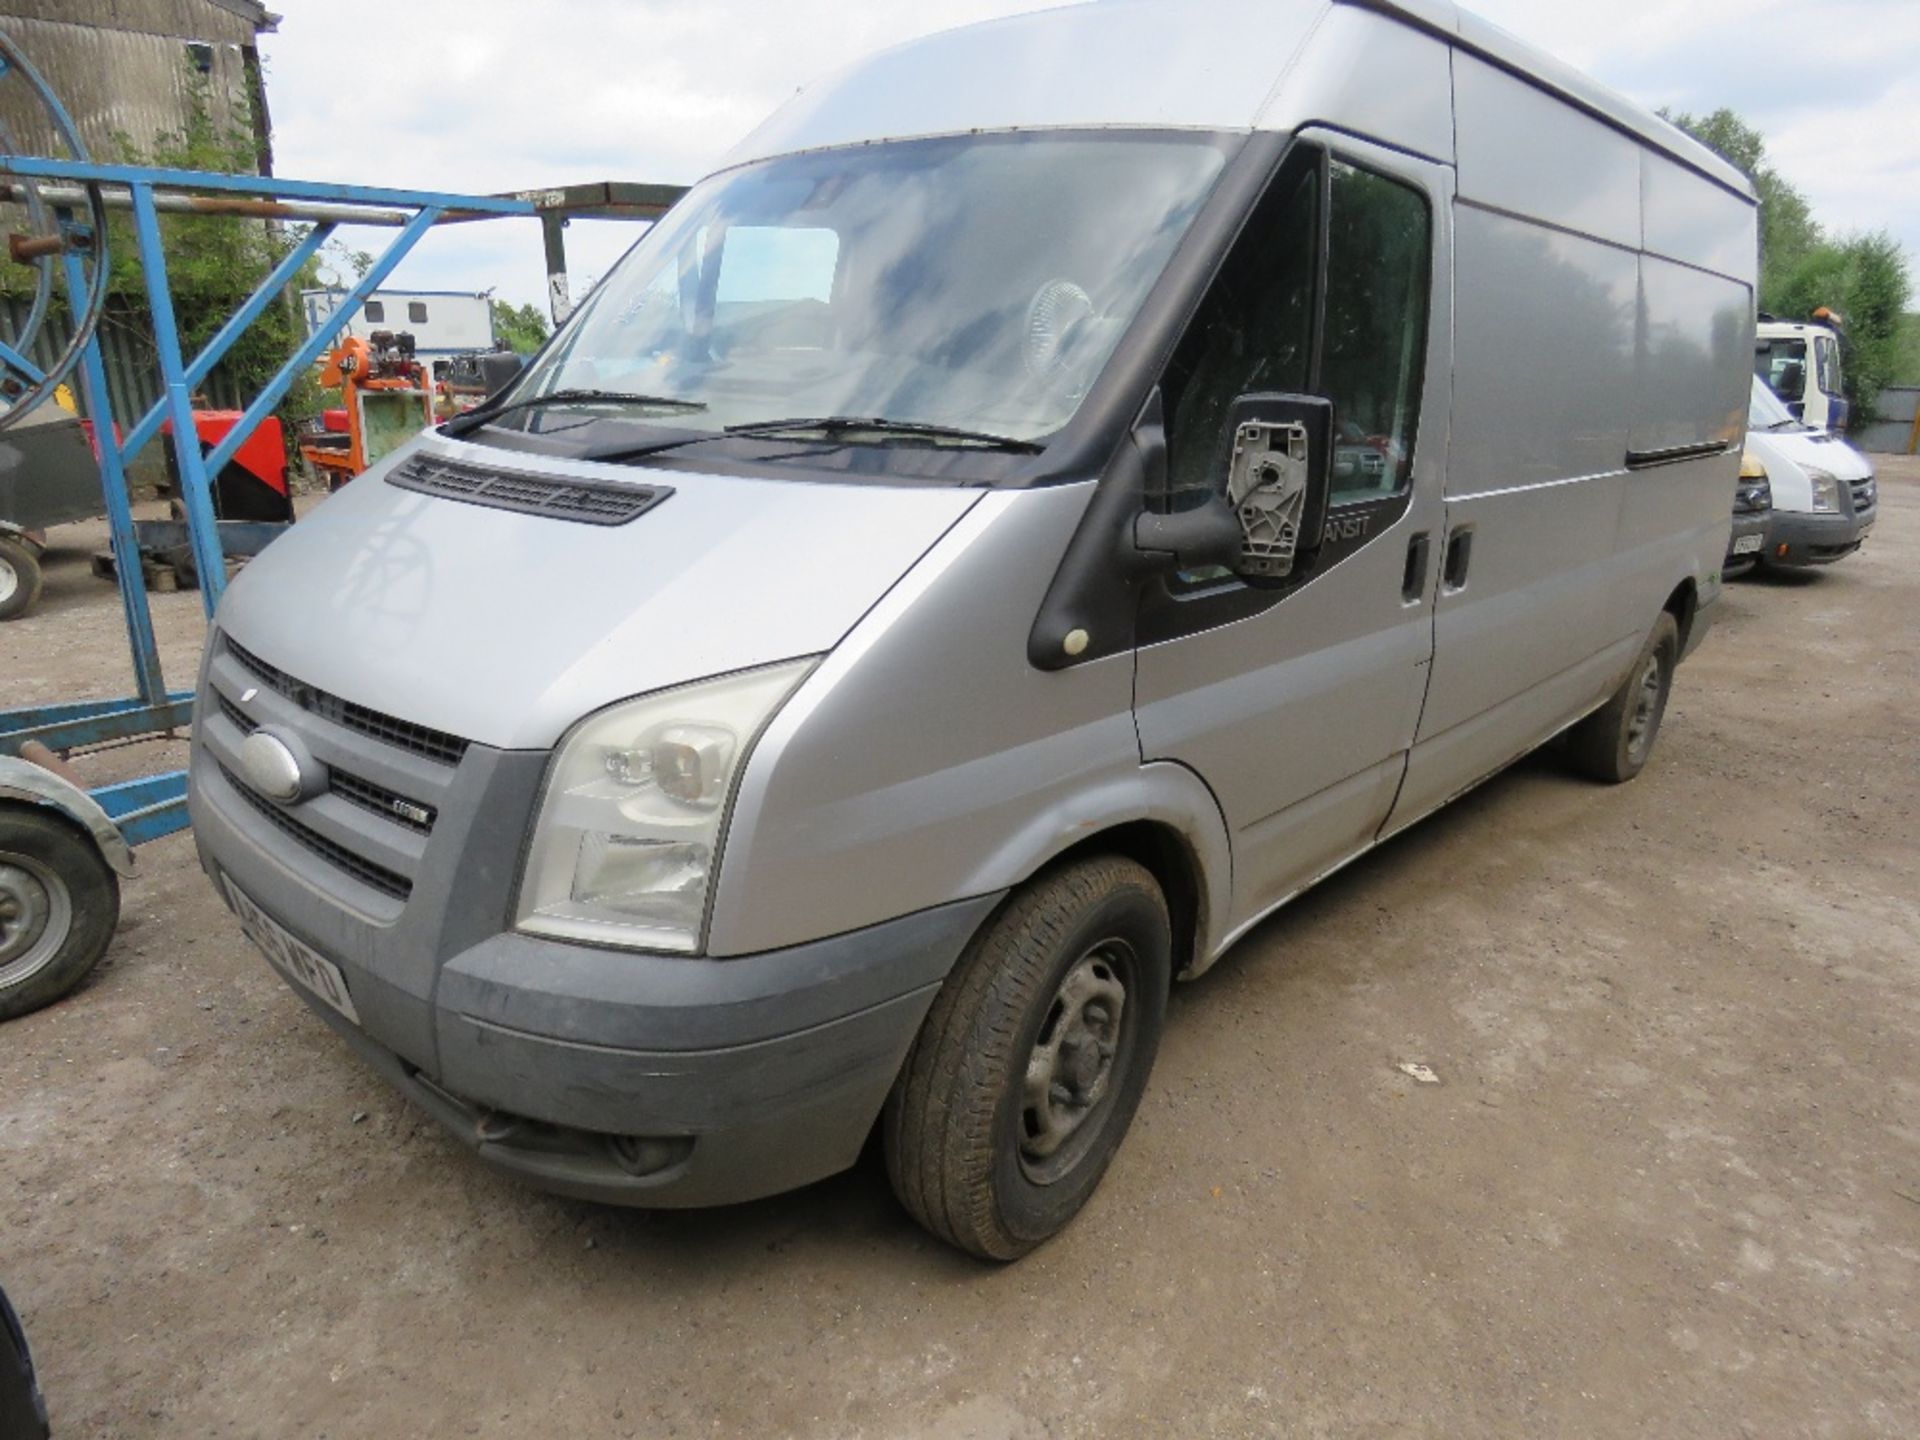 FORD TRANSIT 115T350 PANEL VAN, TEST EXPIRED, WITH V5 REG: AJ56 WFO WHEN TESTED WAS SEEN TO DRIVE